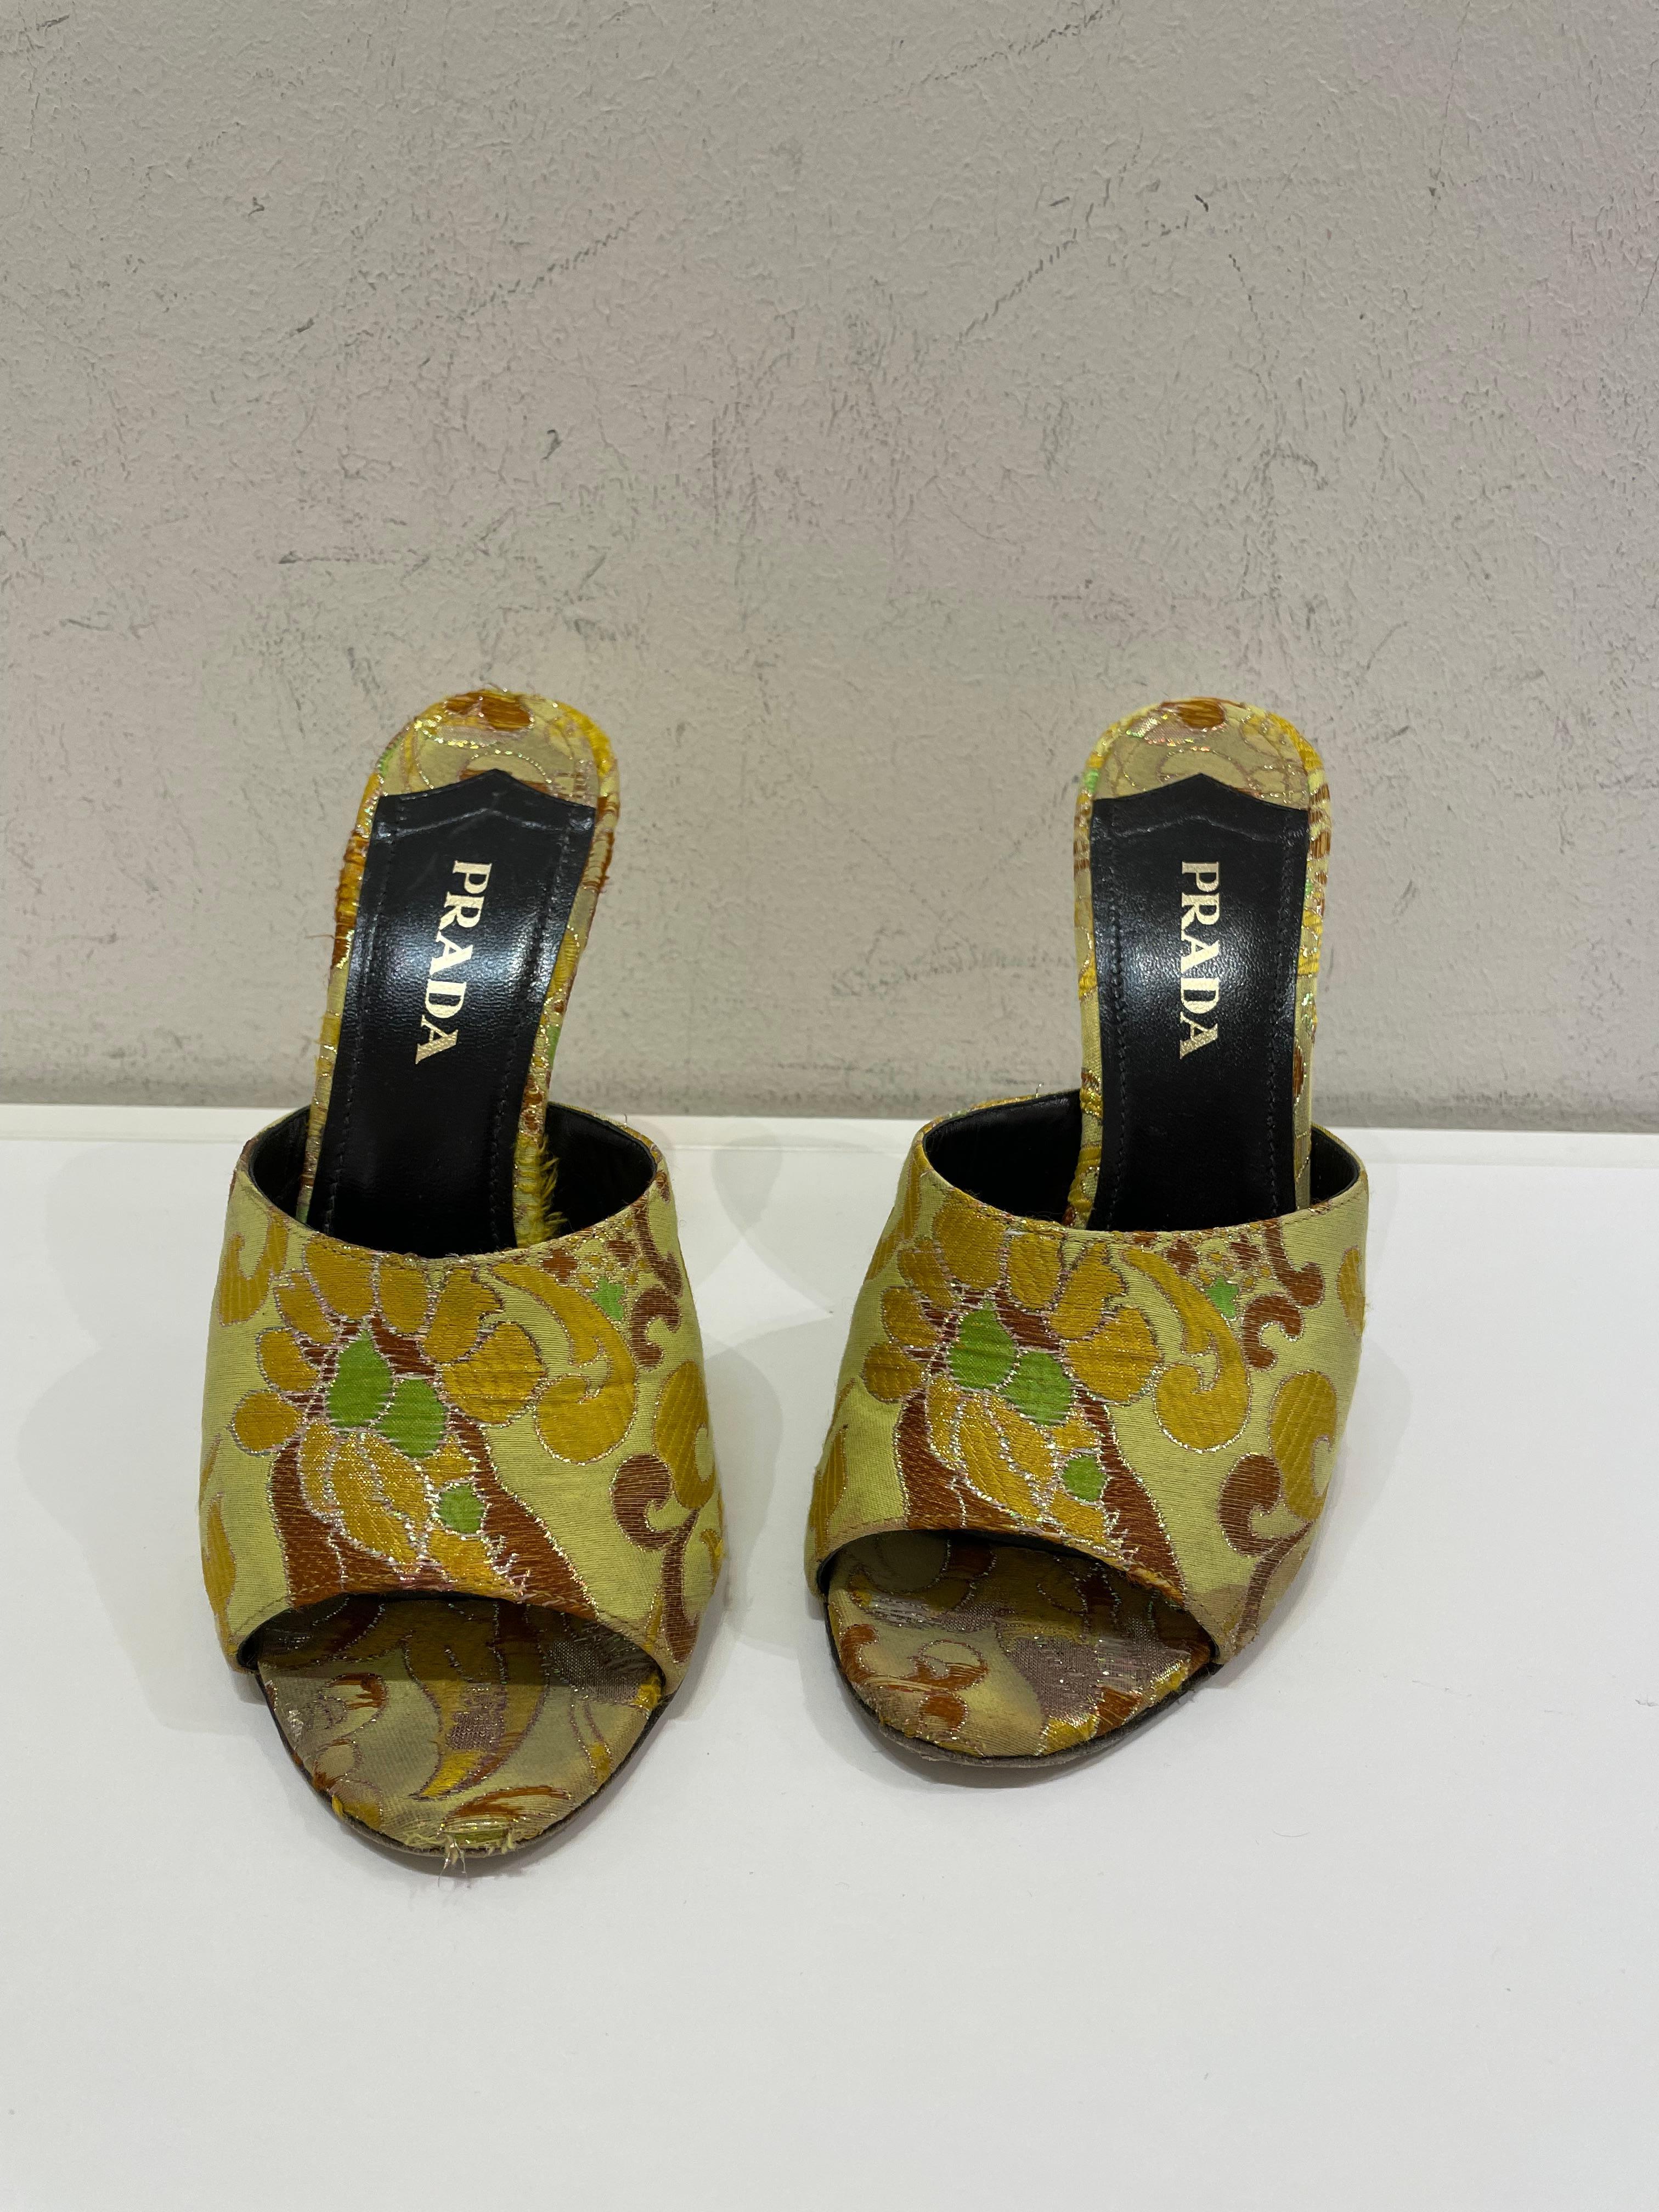 Brown Sabot with Prada heel in damask fabric in shades of yellow.